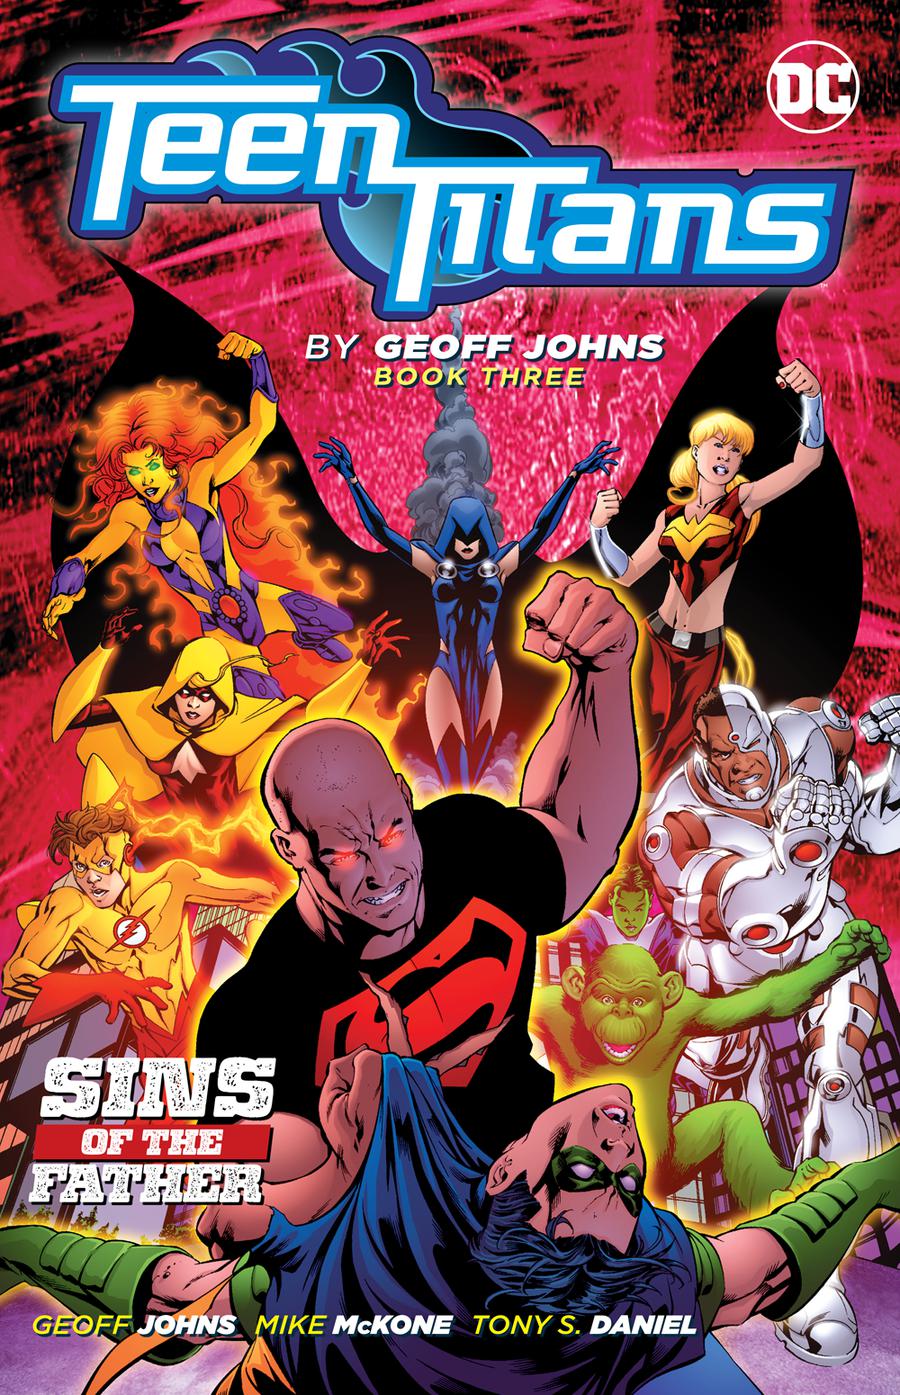 Teen Titans By Geoff Johns Book 3 TP